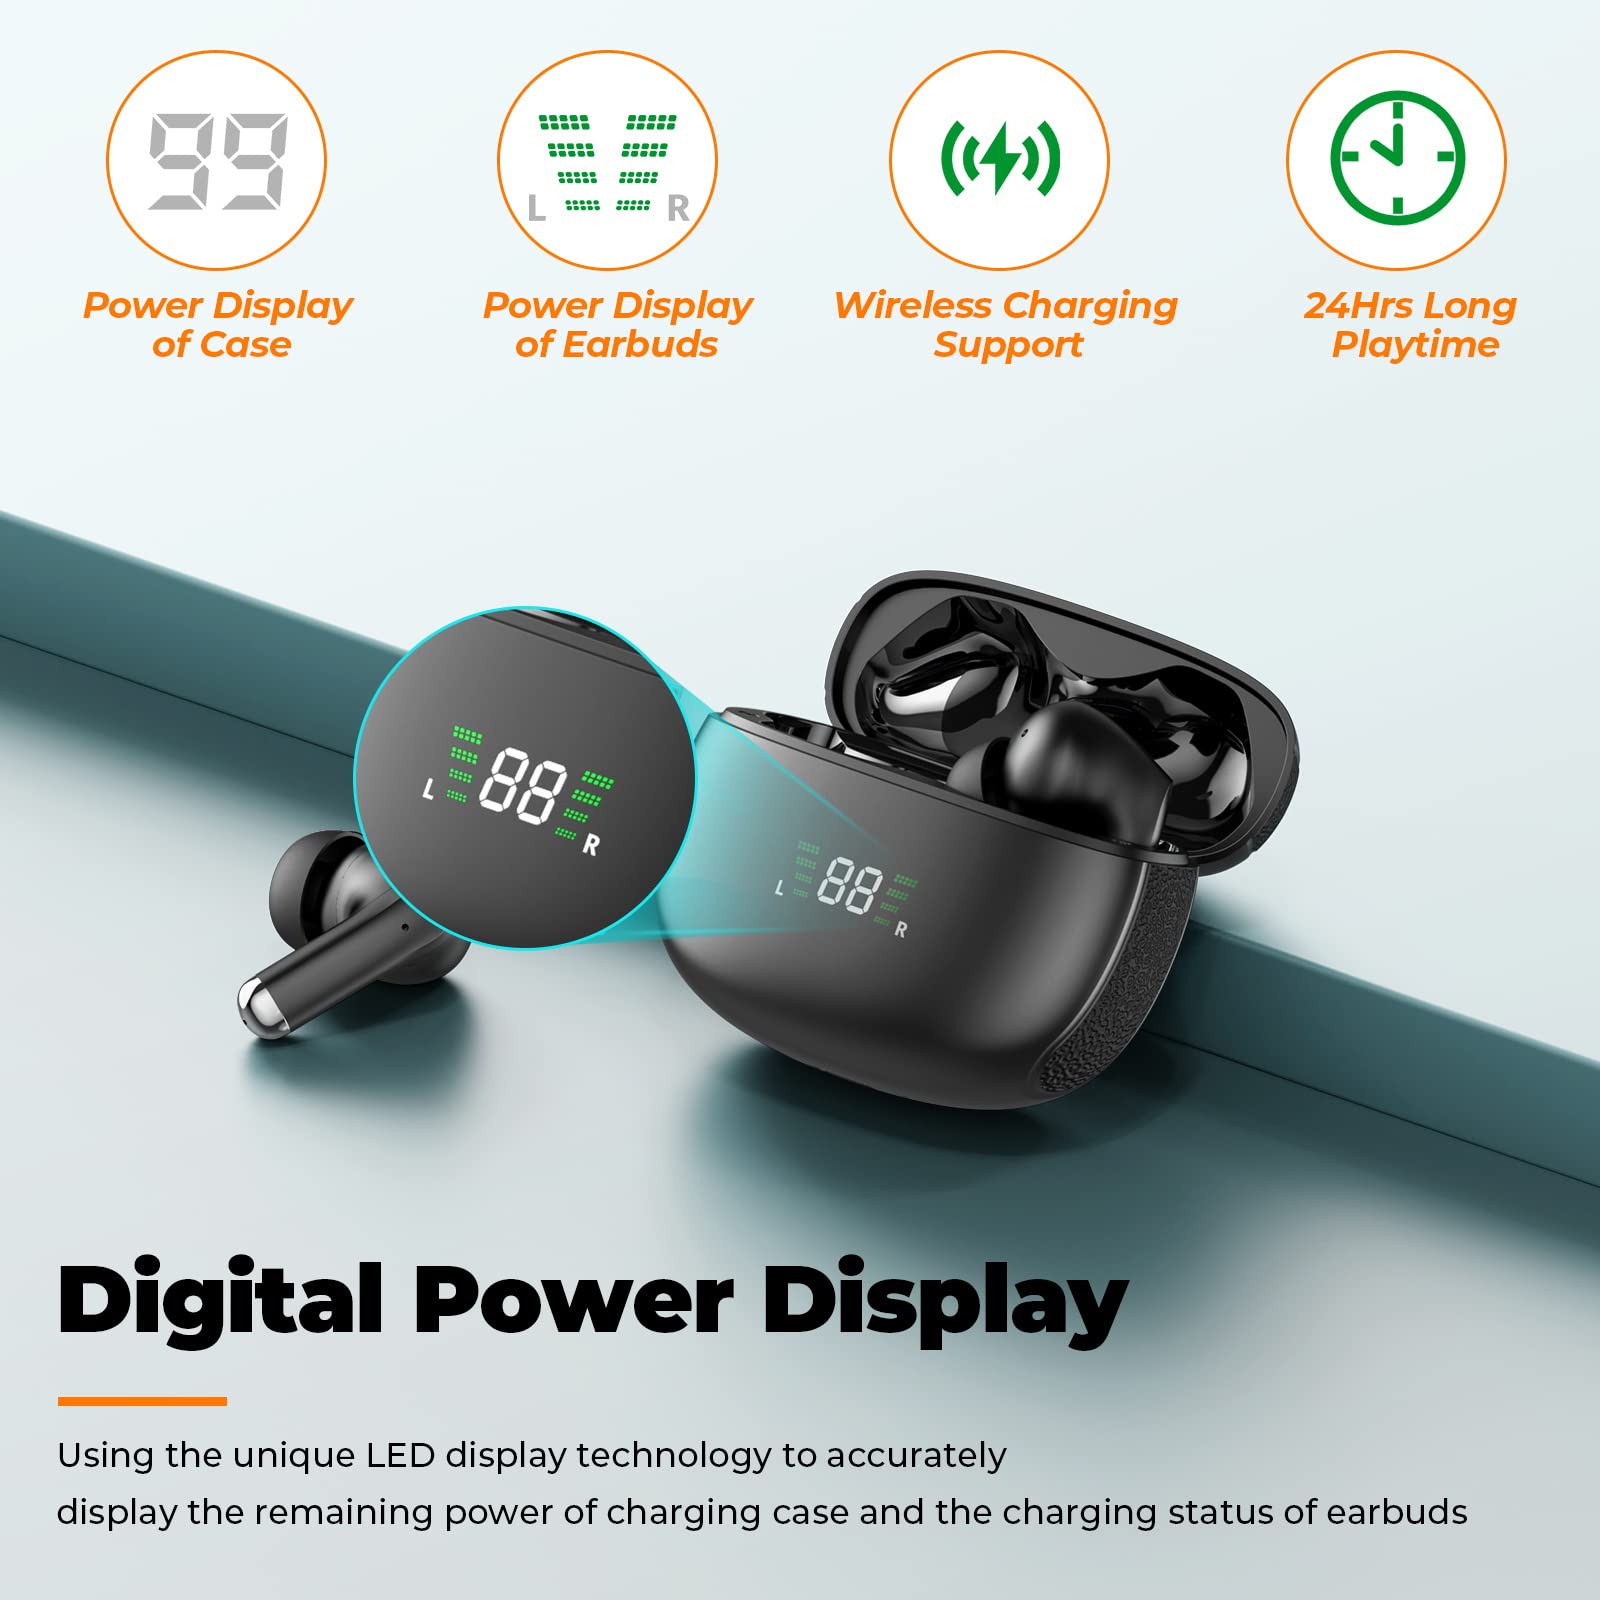 ENACFIRE A12 ANC Wireless Earbuds